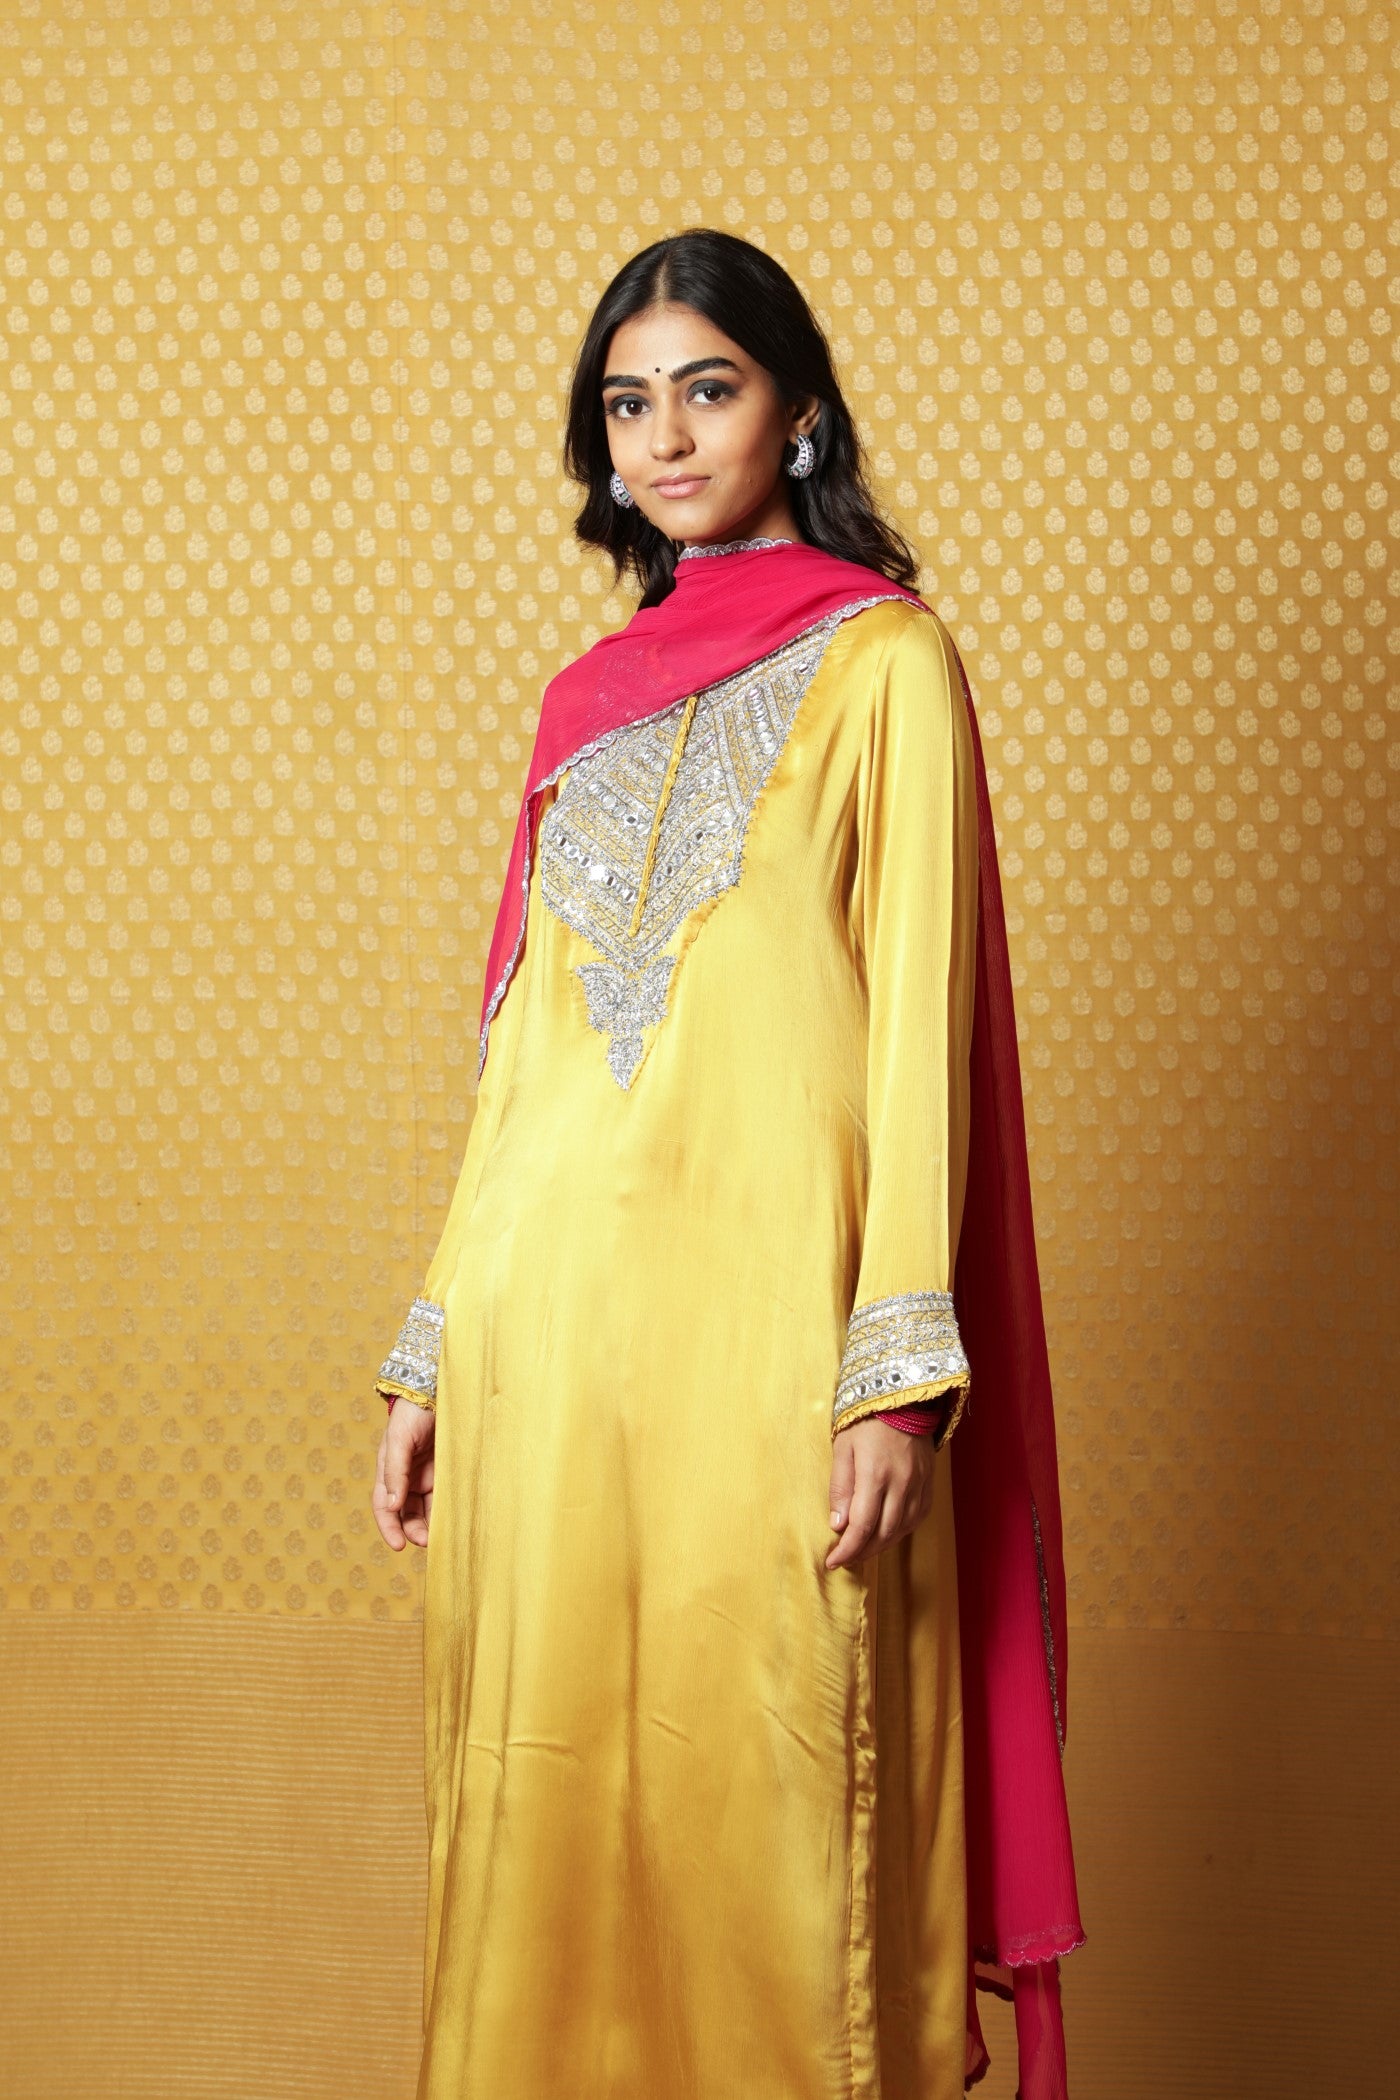 Mustard Hand-Embroidered Satin Kurta Paired With Pink Dupatta And Pink Pants